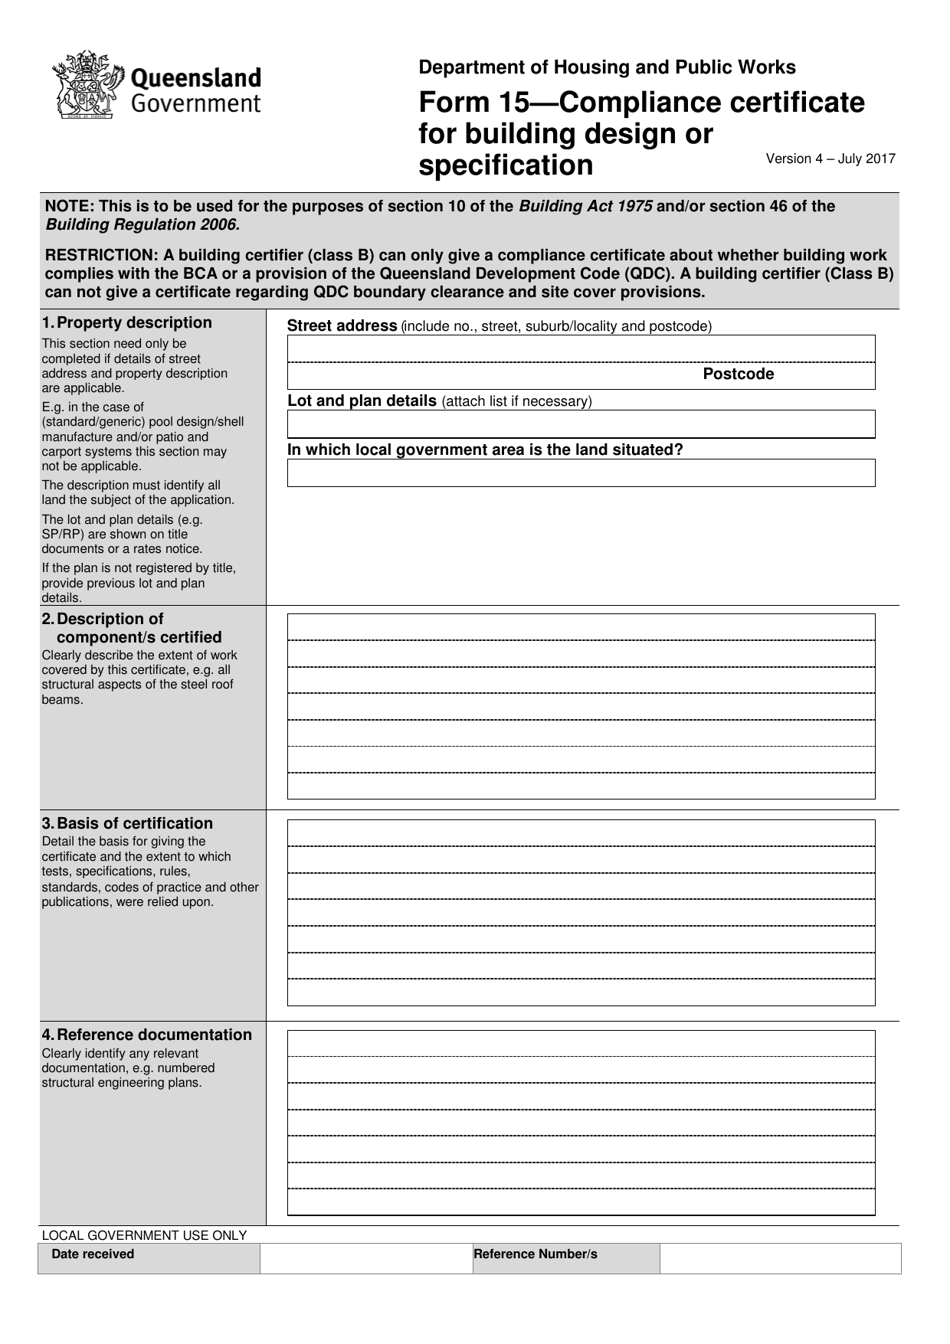 Form 15 Compliance Certificate for Building Design or Specification - Queensland, Australia, Page 1